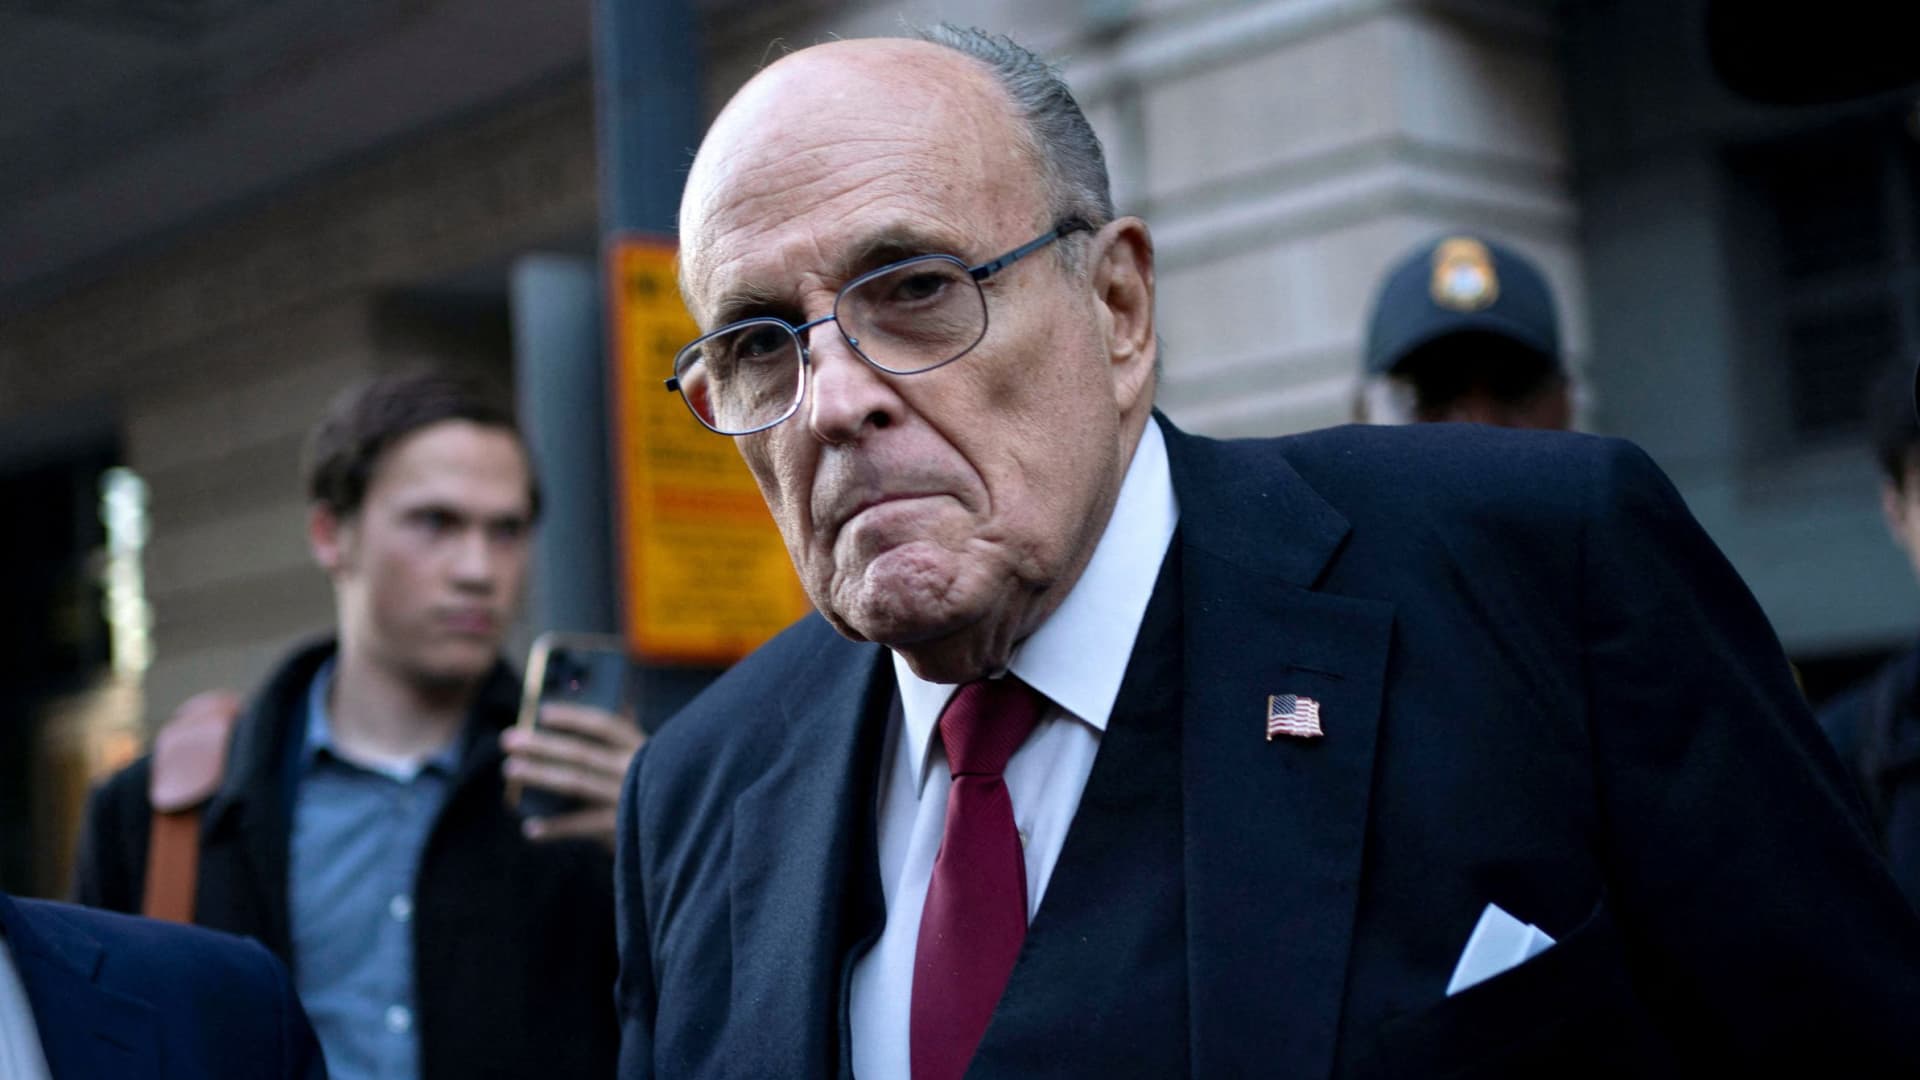 Former Trump lawyer Rudy Giuliani disbarred in New York after criminal indictments